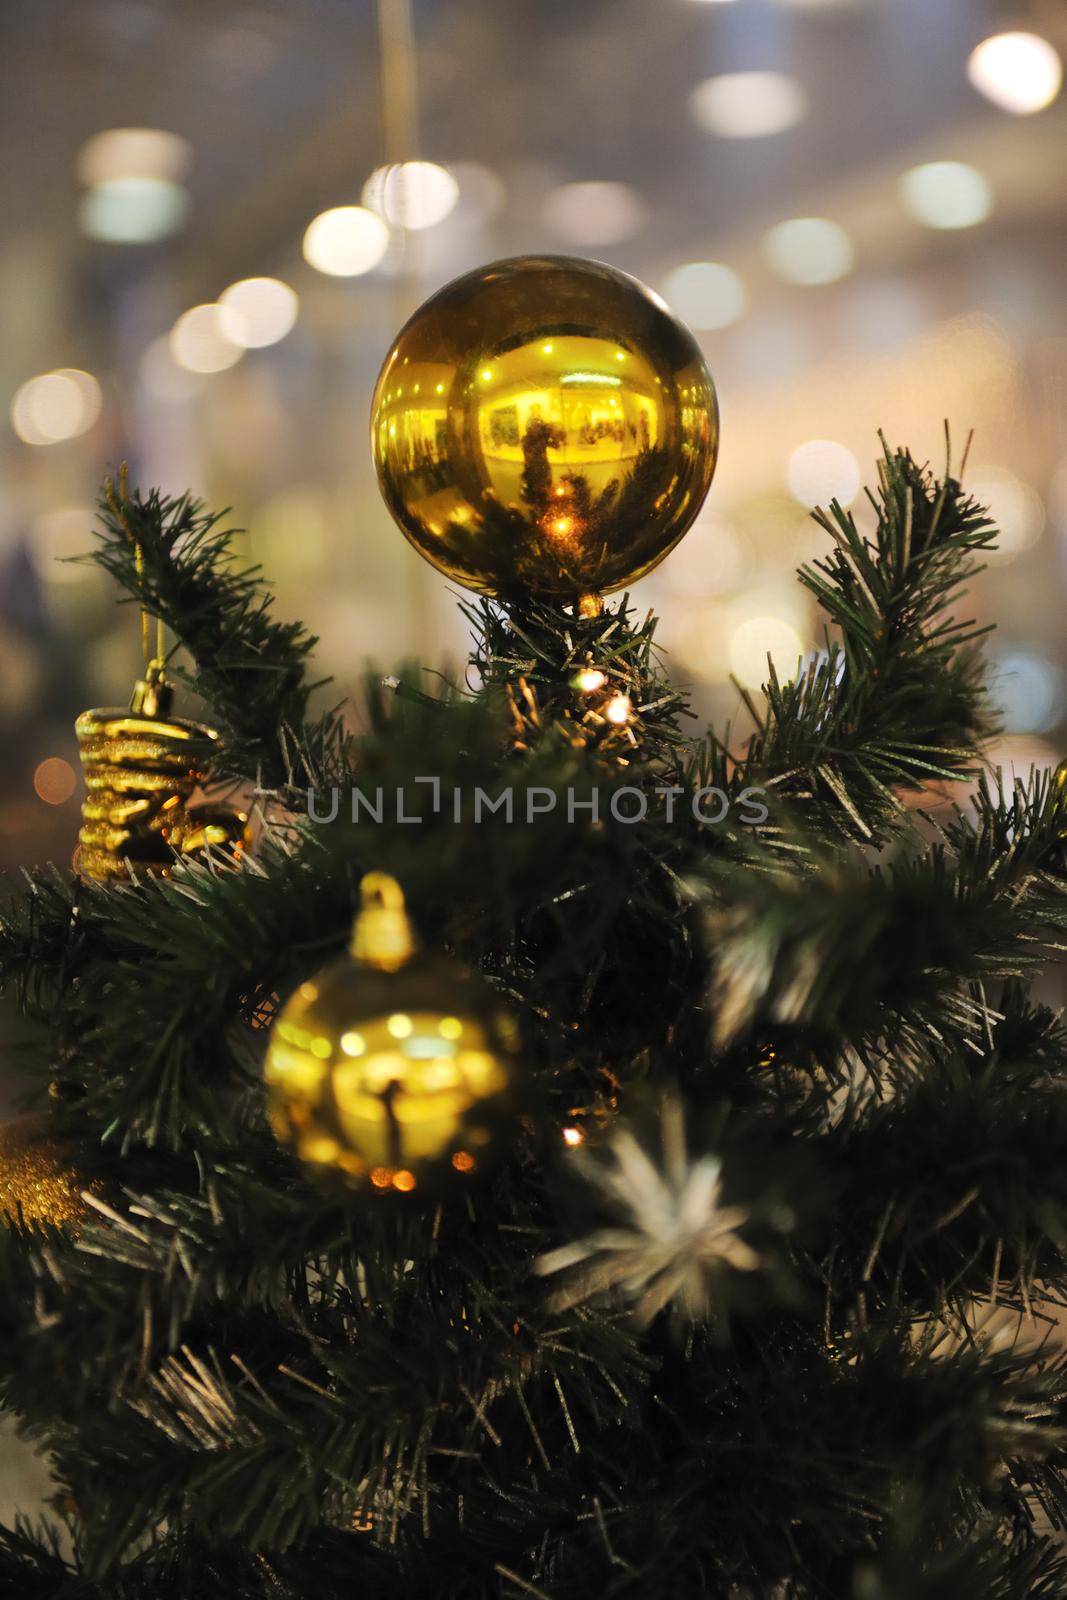 xmas tree decoration closeup with blured lights in shopping centre in backgroun